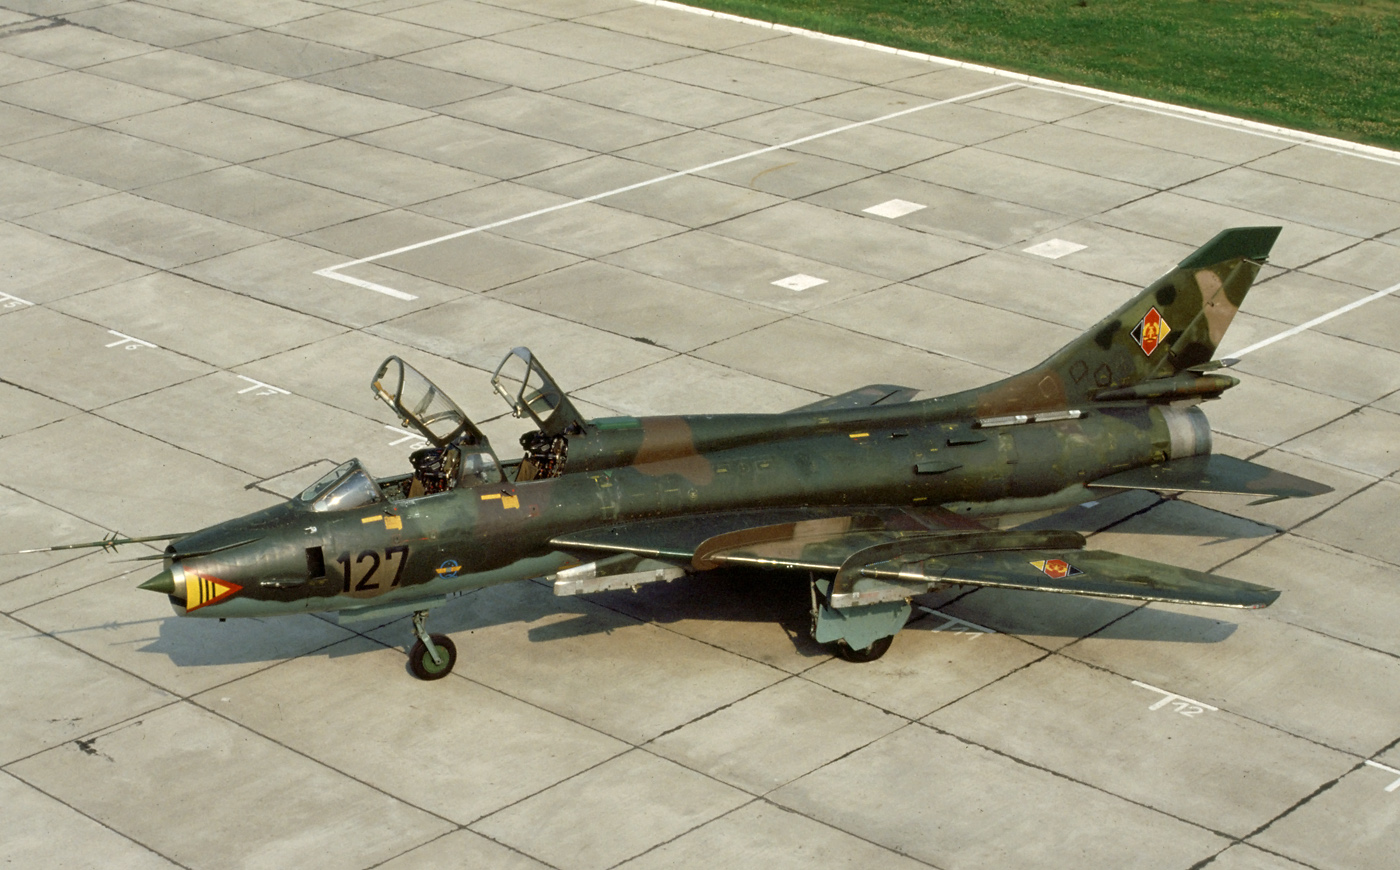 Aircraft Sukhoi Su-22 as part of the 1st Tactical Aviation Regiment